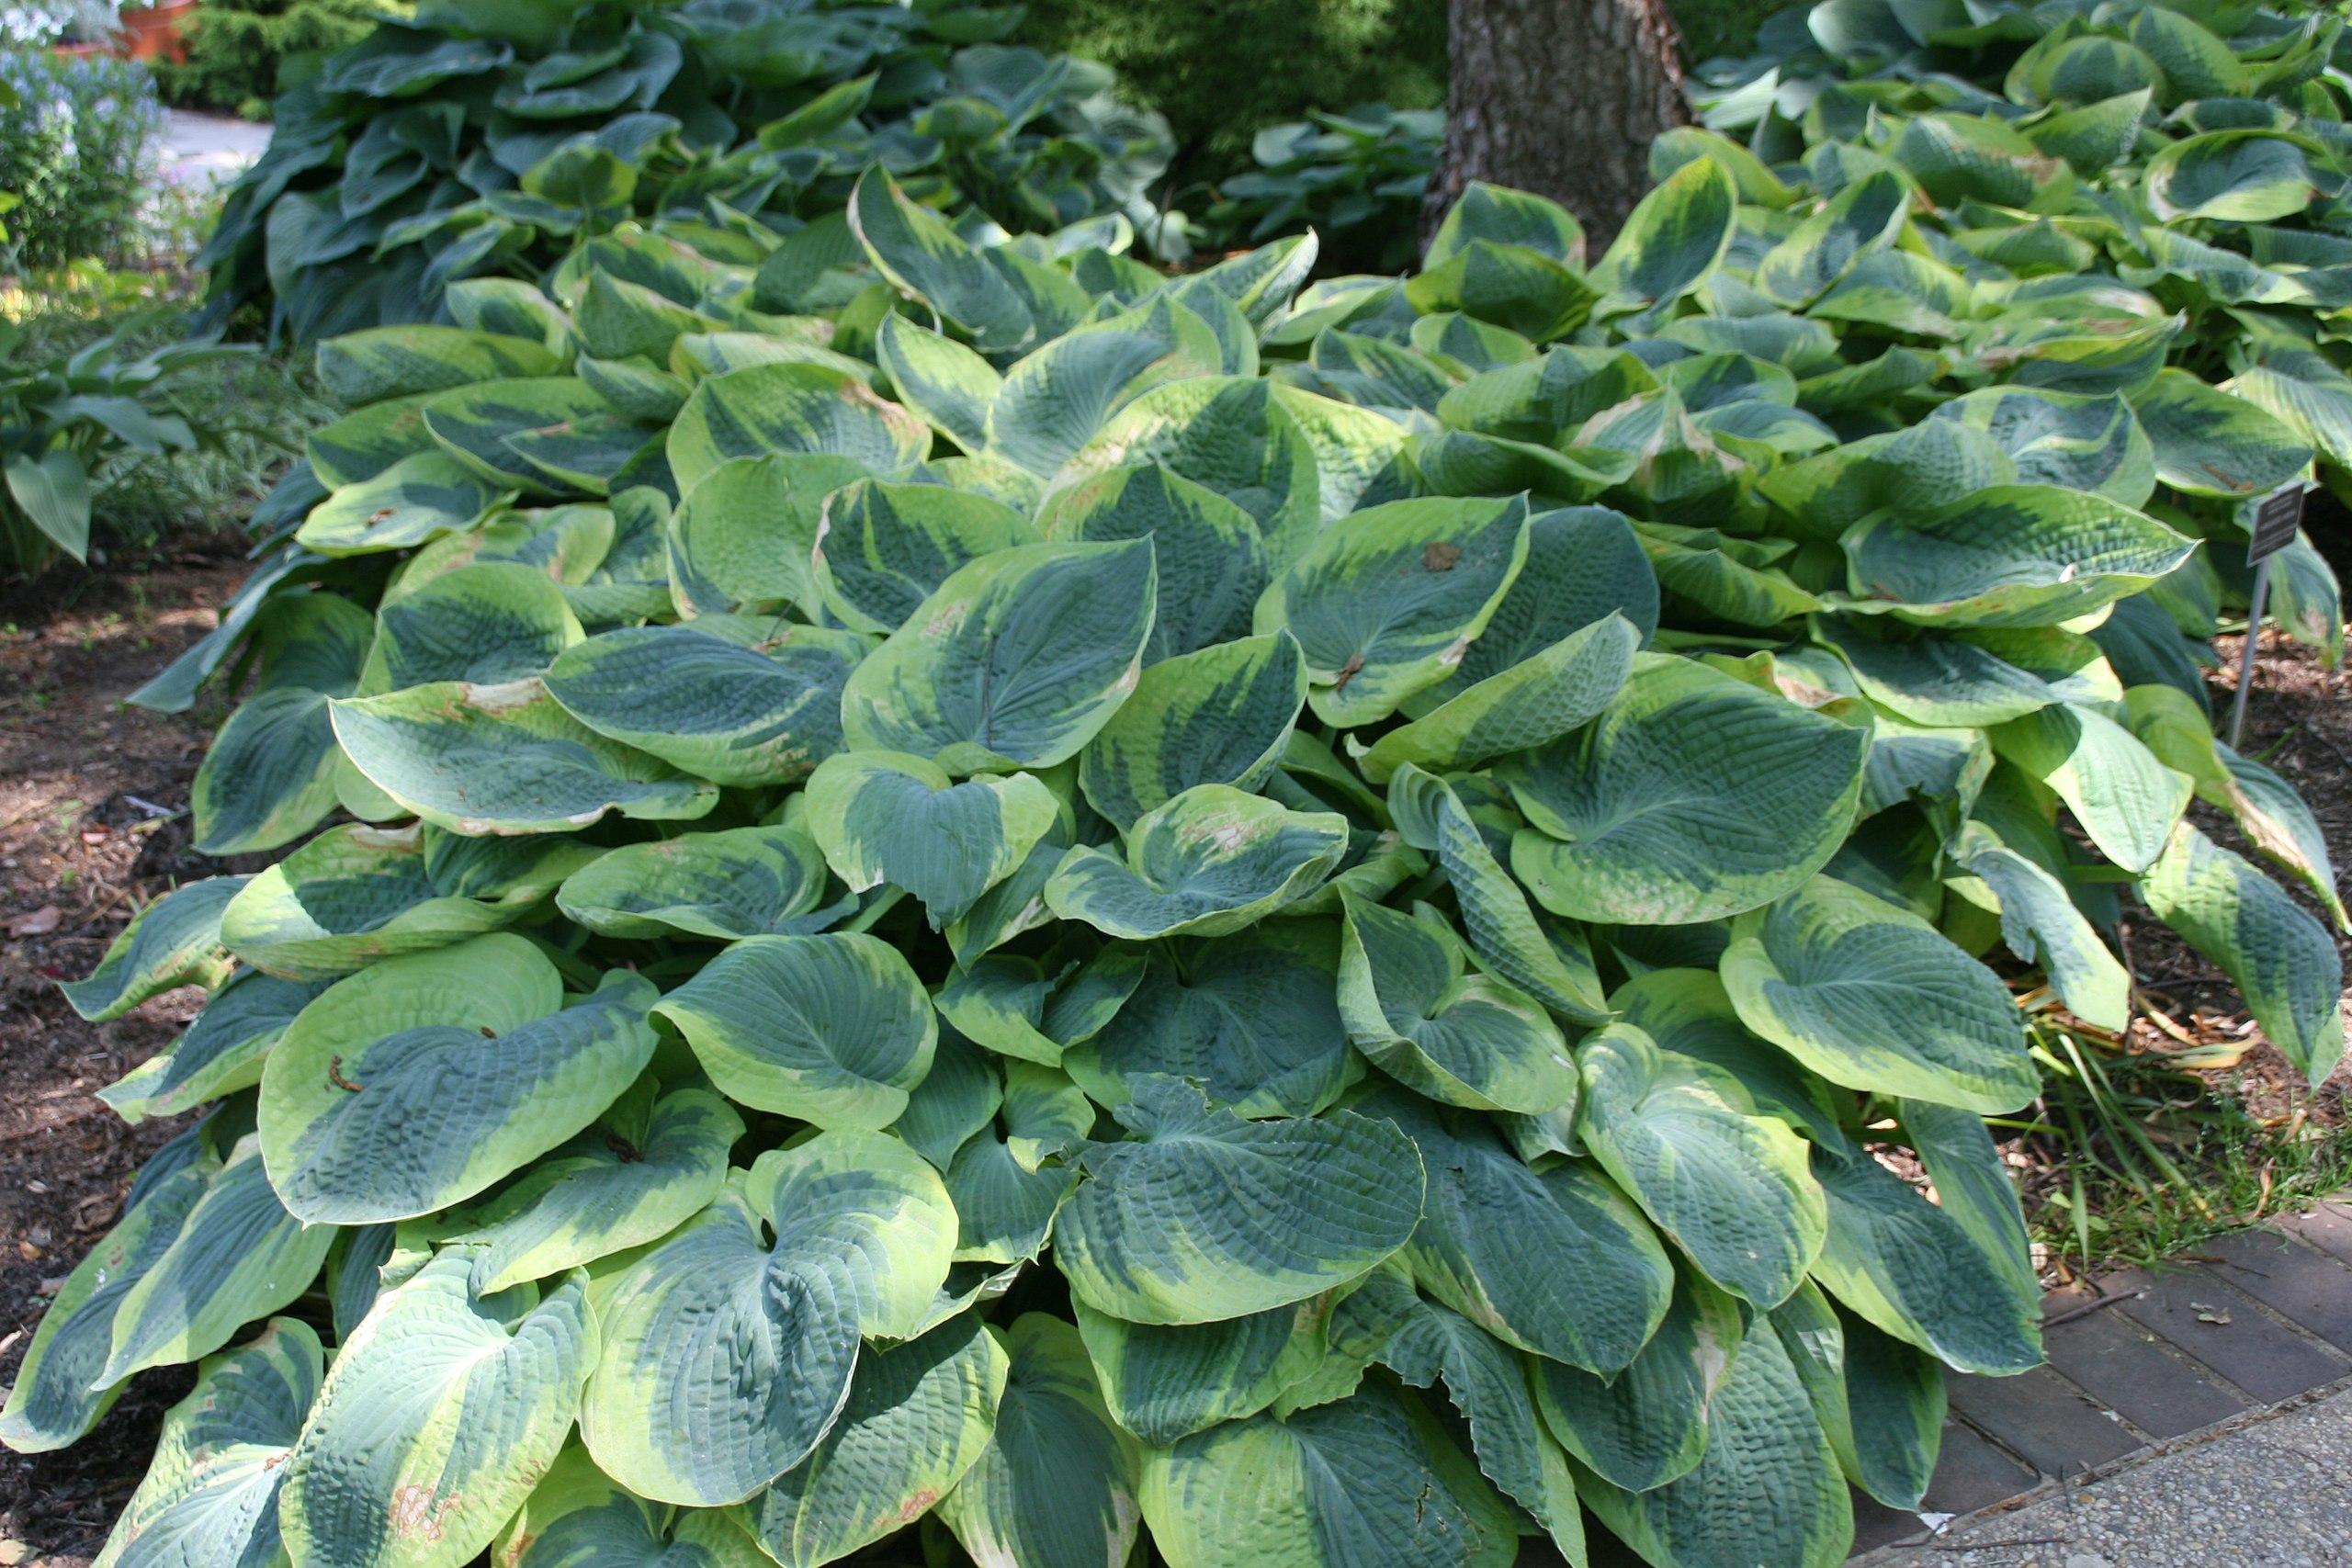 Yellow-green leaves with yellow midrib and blades.